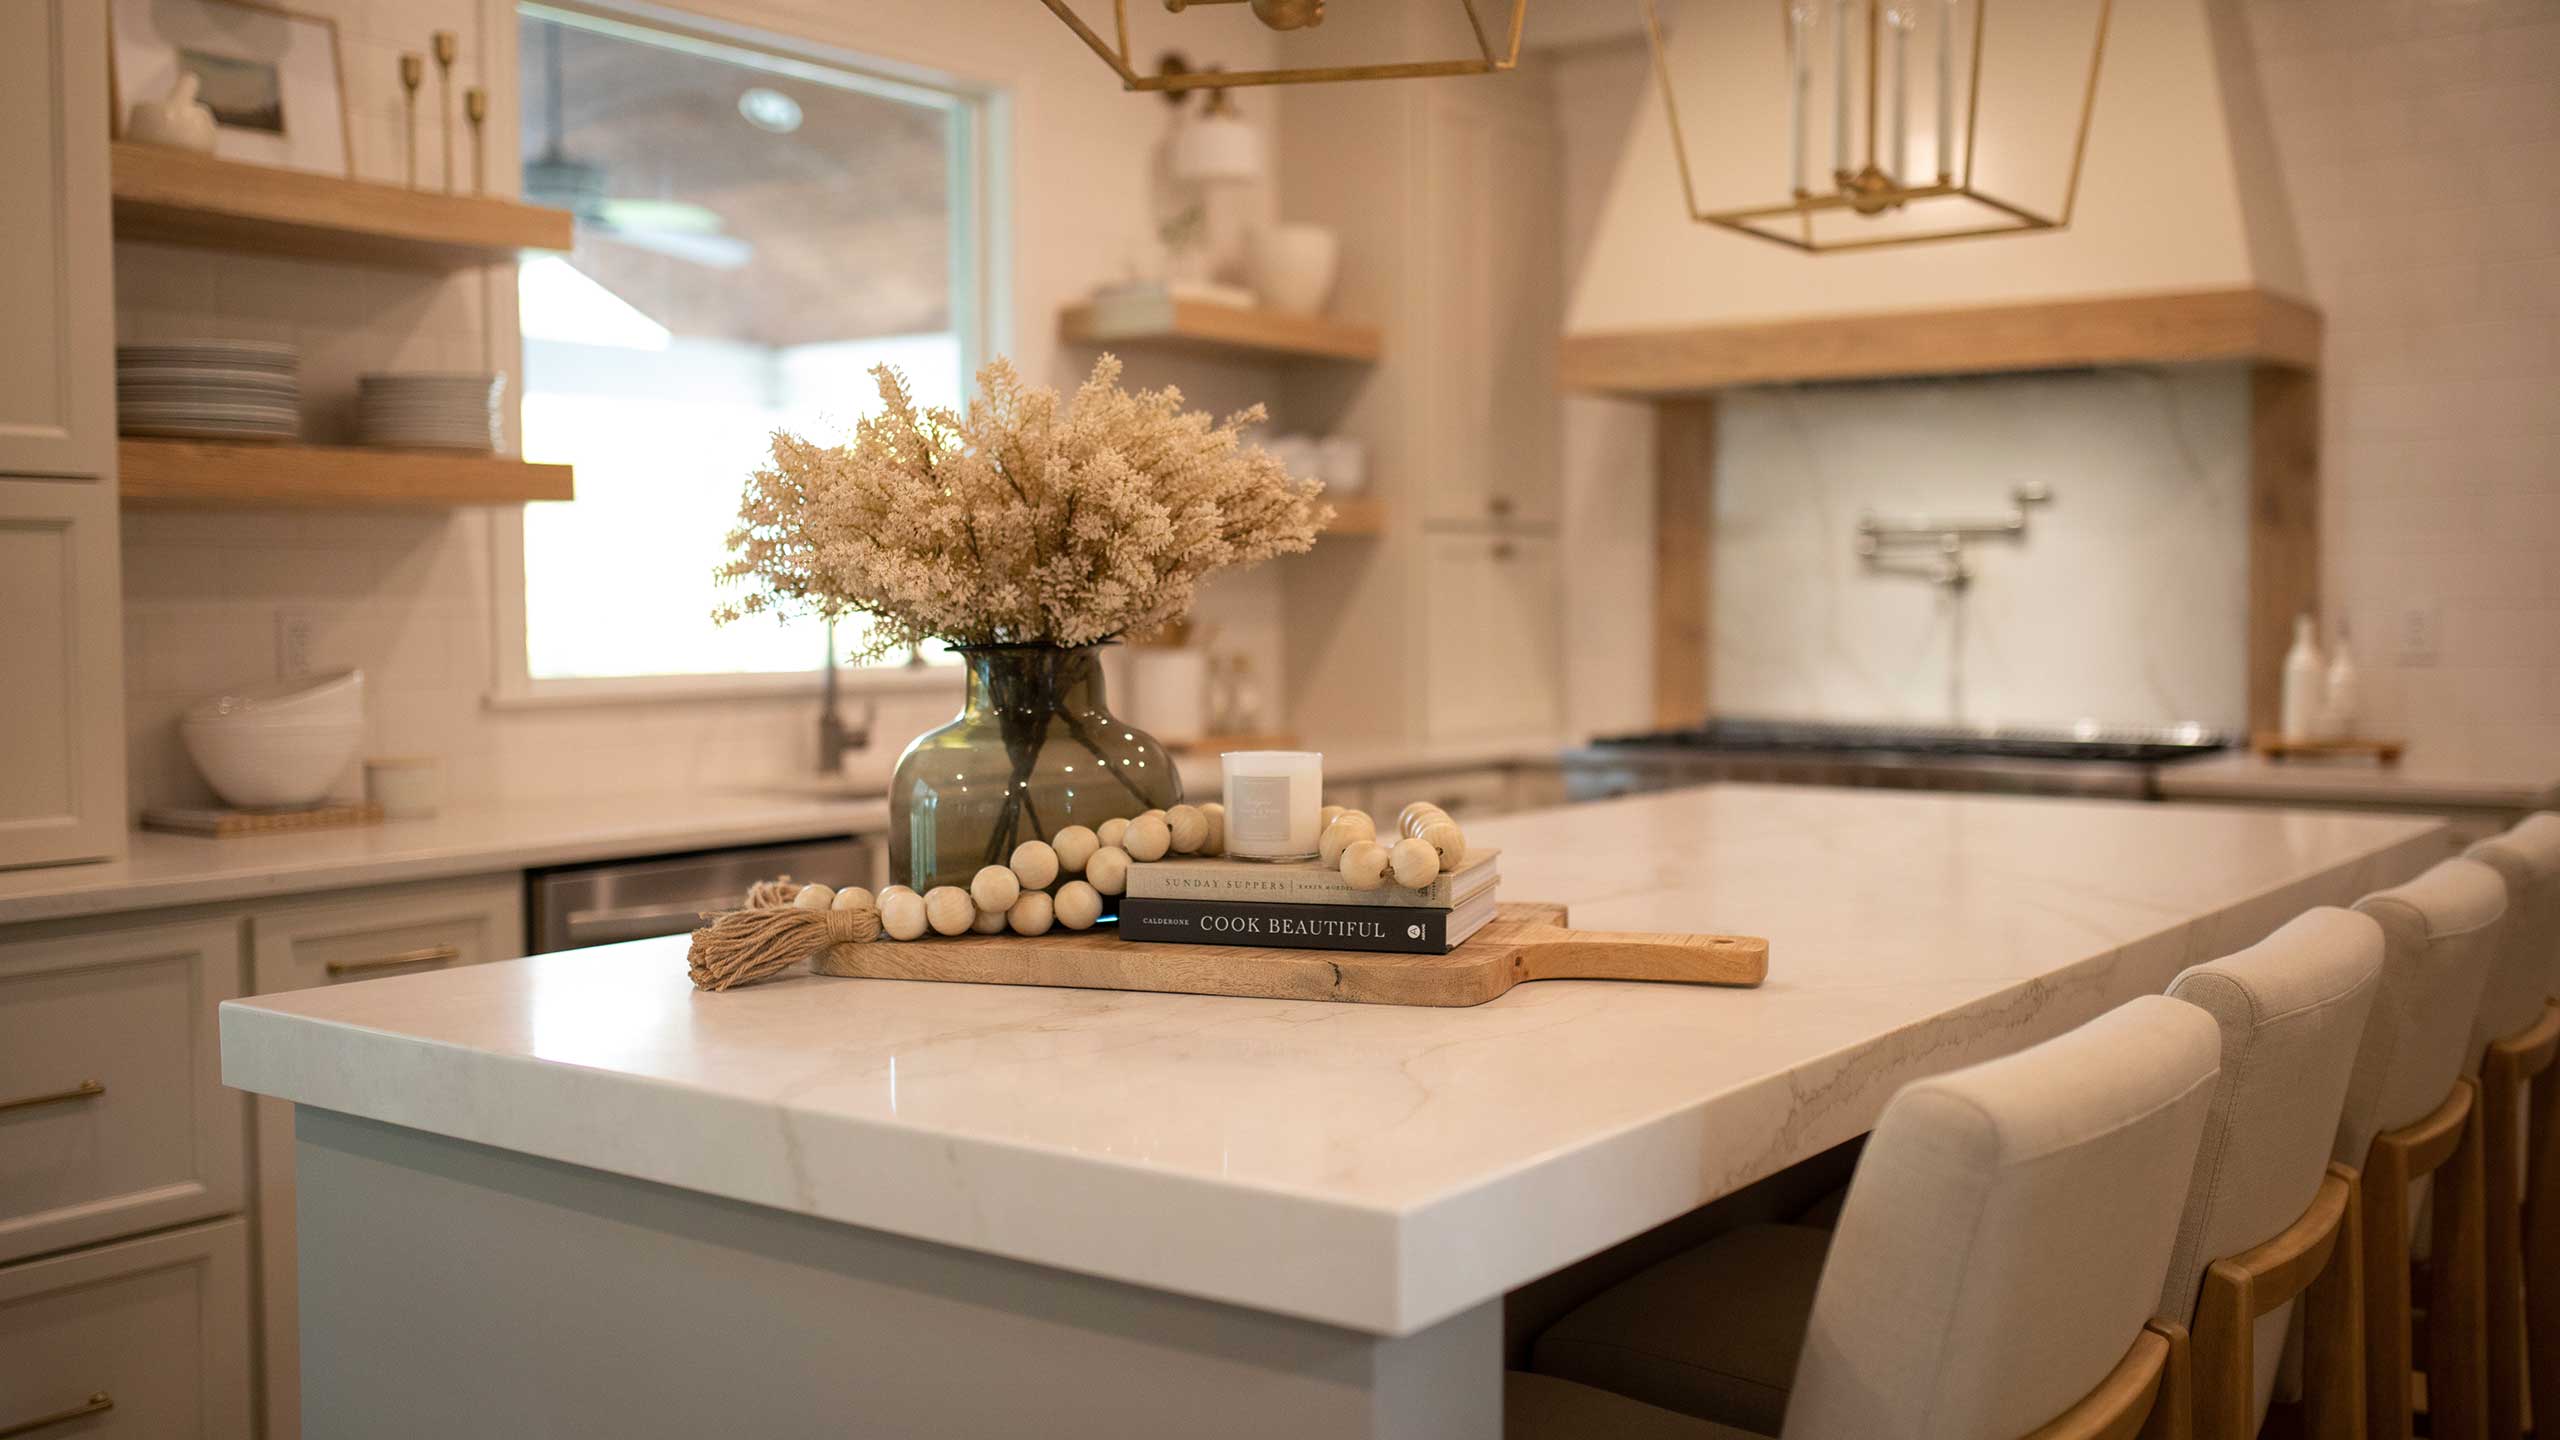 This kitchen features white cabinetry and an island with a white quartz countertop. There is decor sitting on the island.